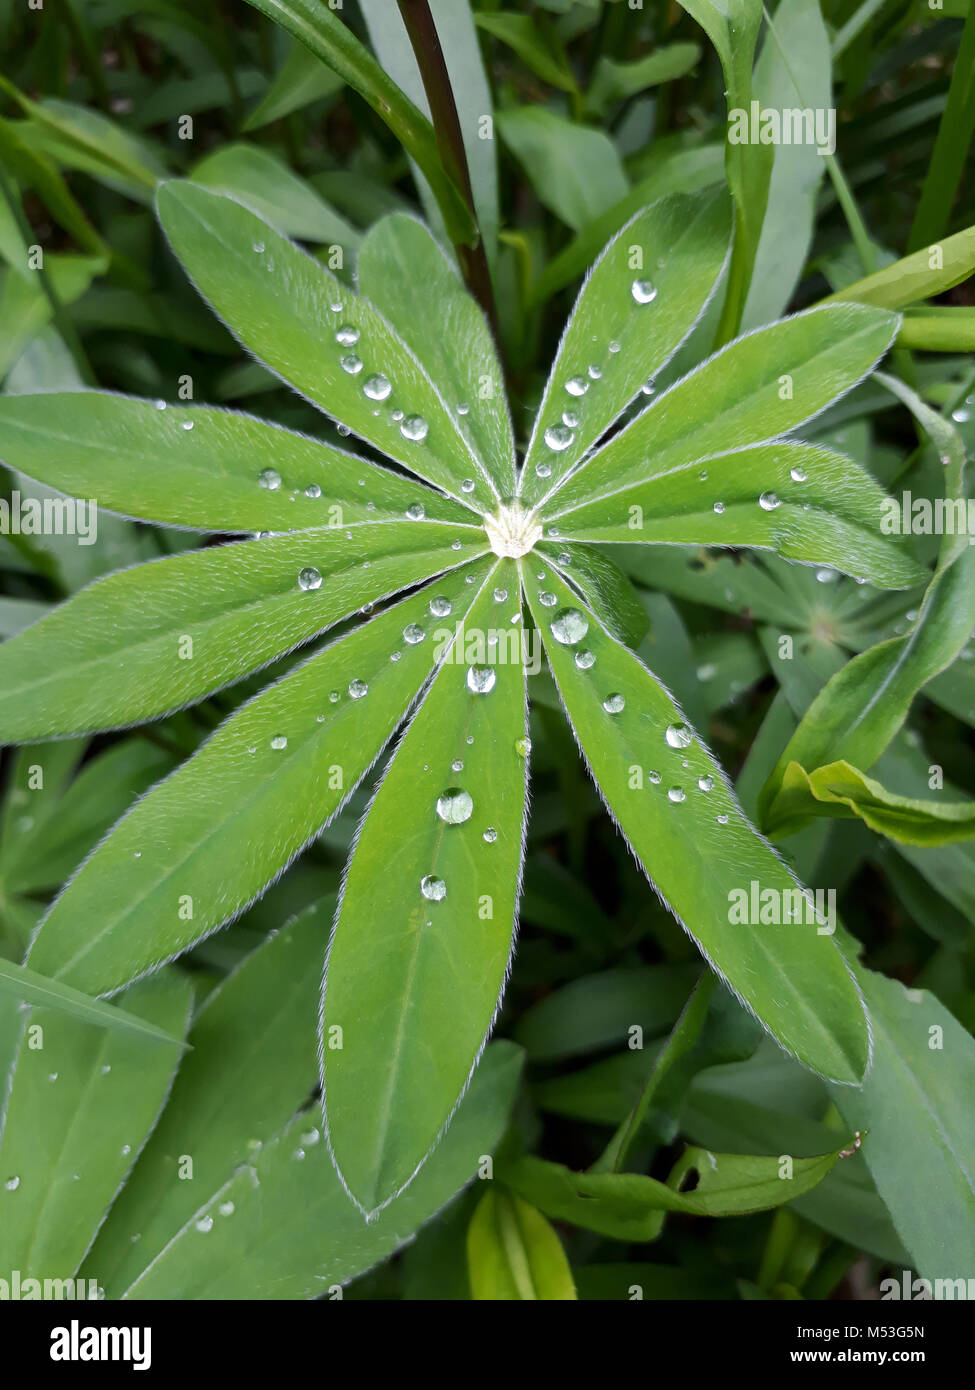 Living lupine leaf with rain drops, morning dew, may be used as background Stock Photo